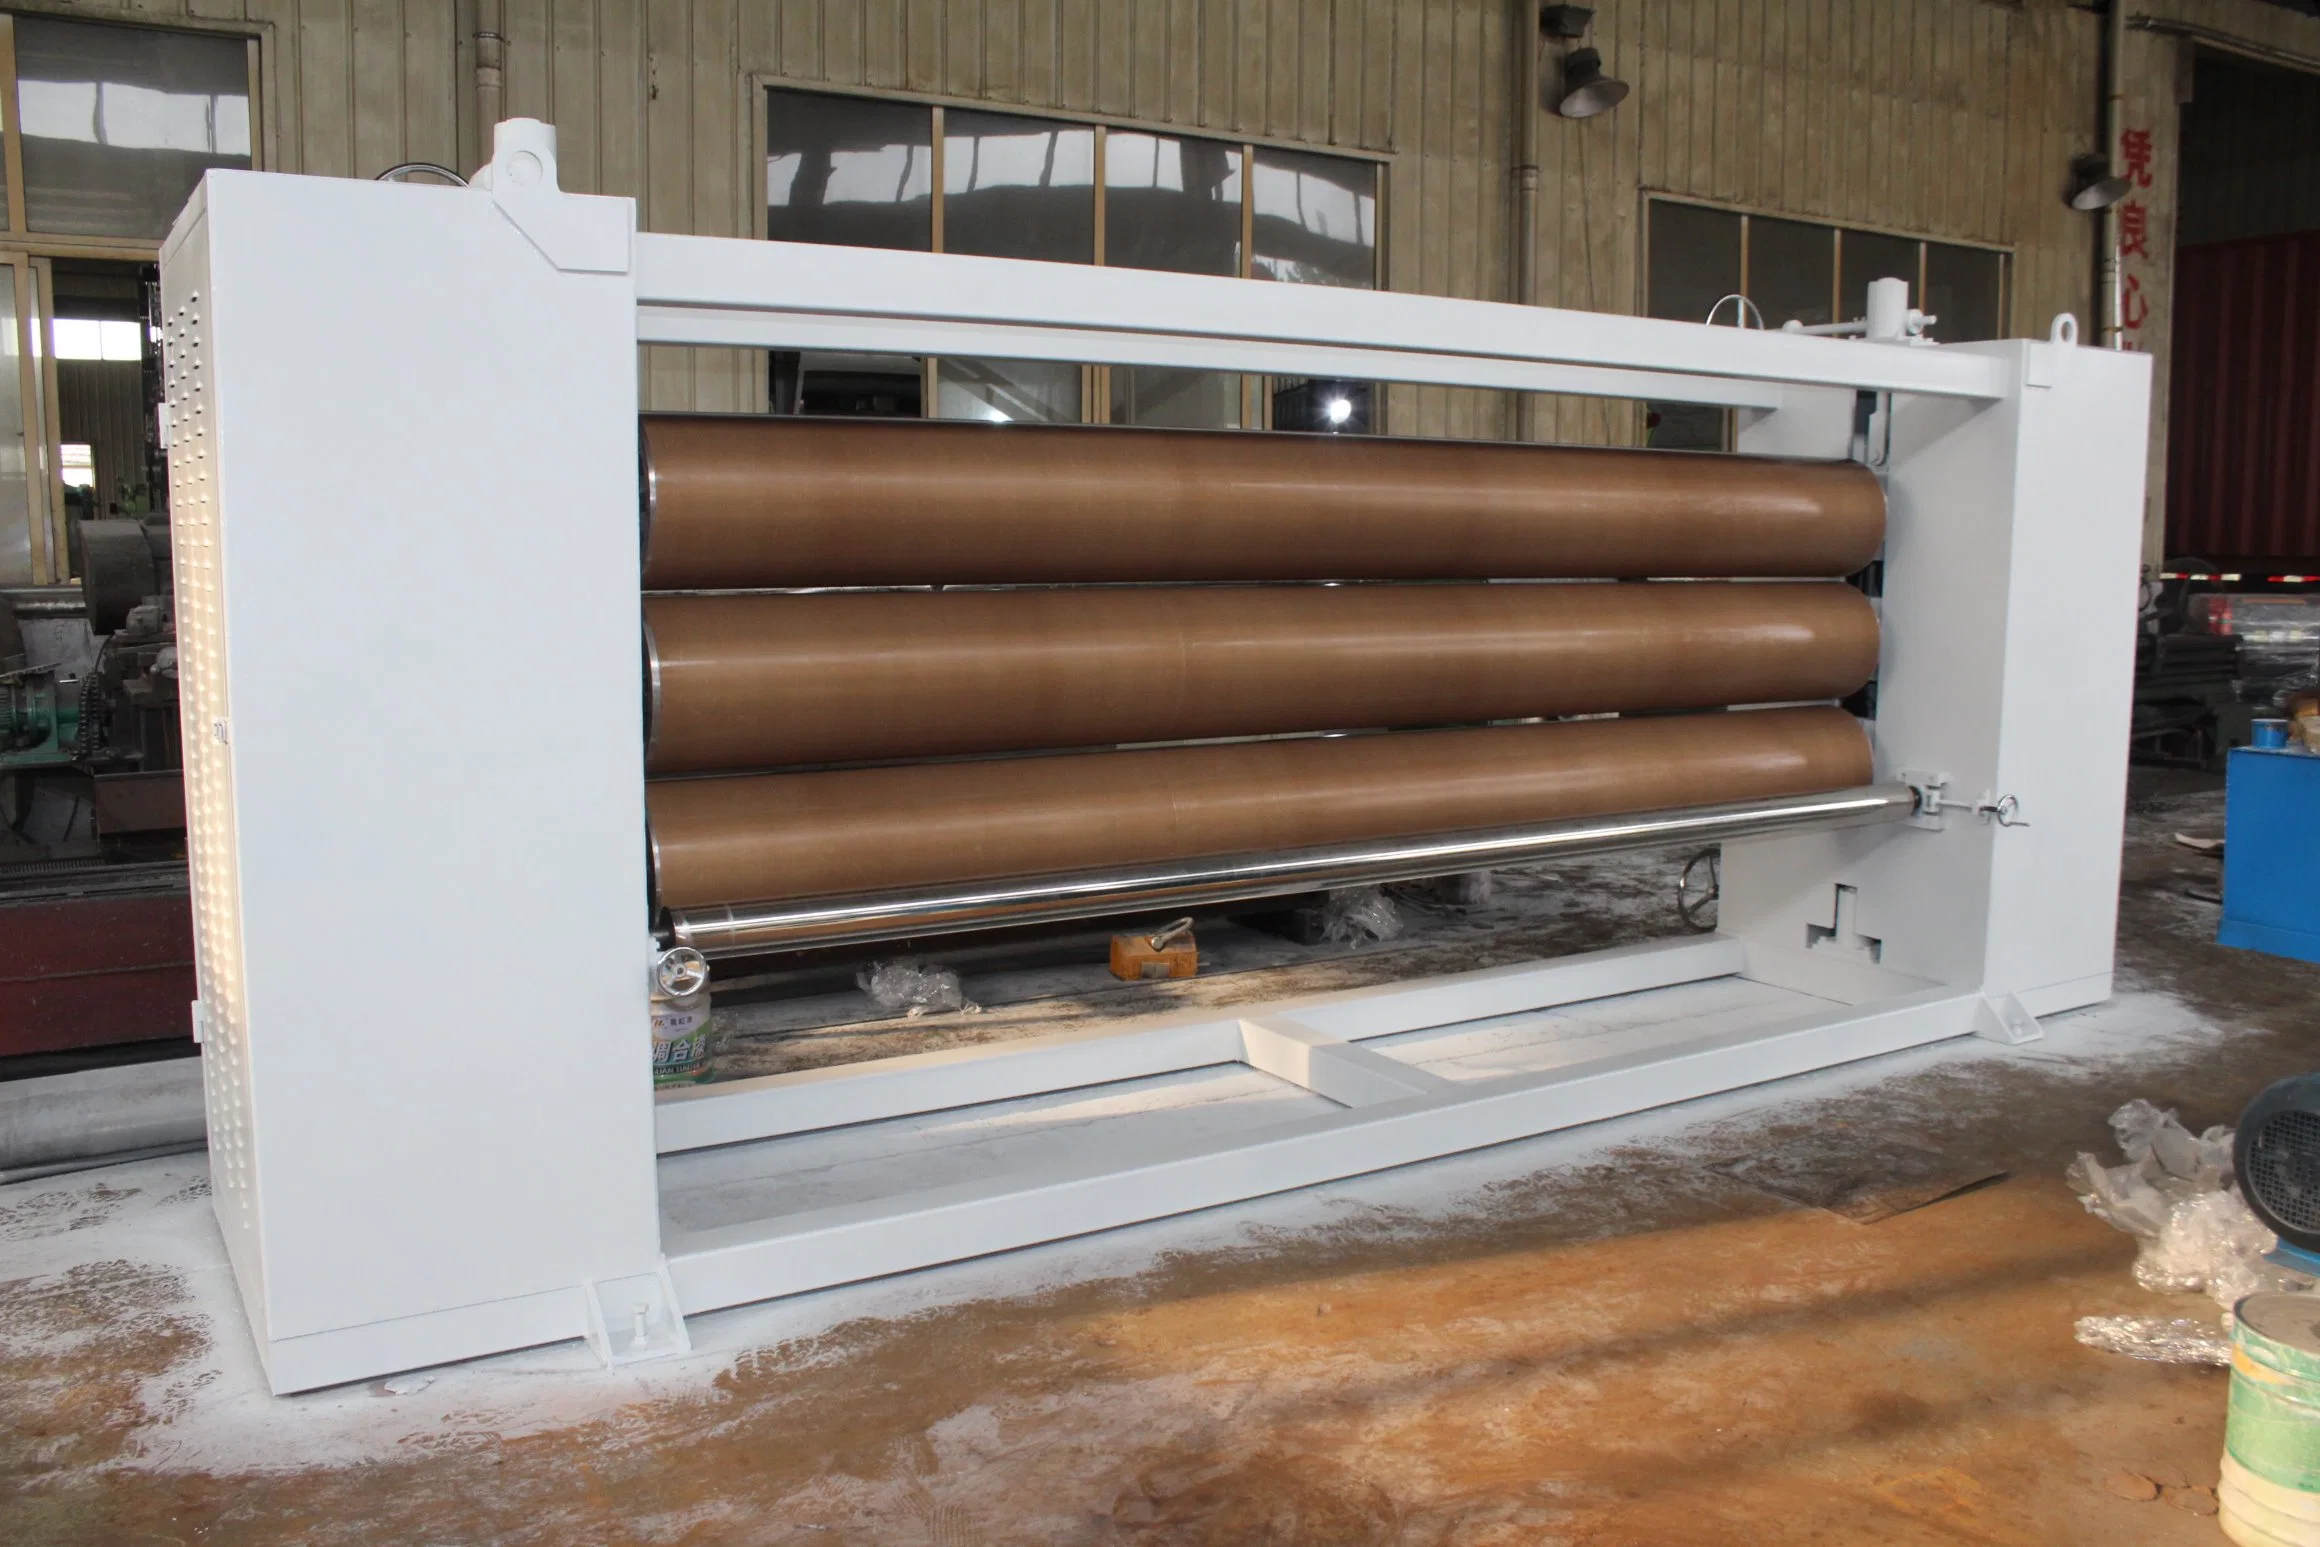 The Machine Produces Non-Woven Felt Geotextile to Achieve The Surface Finish and Flatness of The Ironing Machine